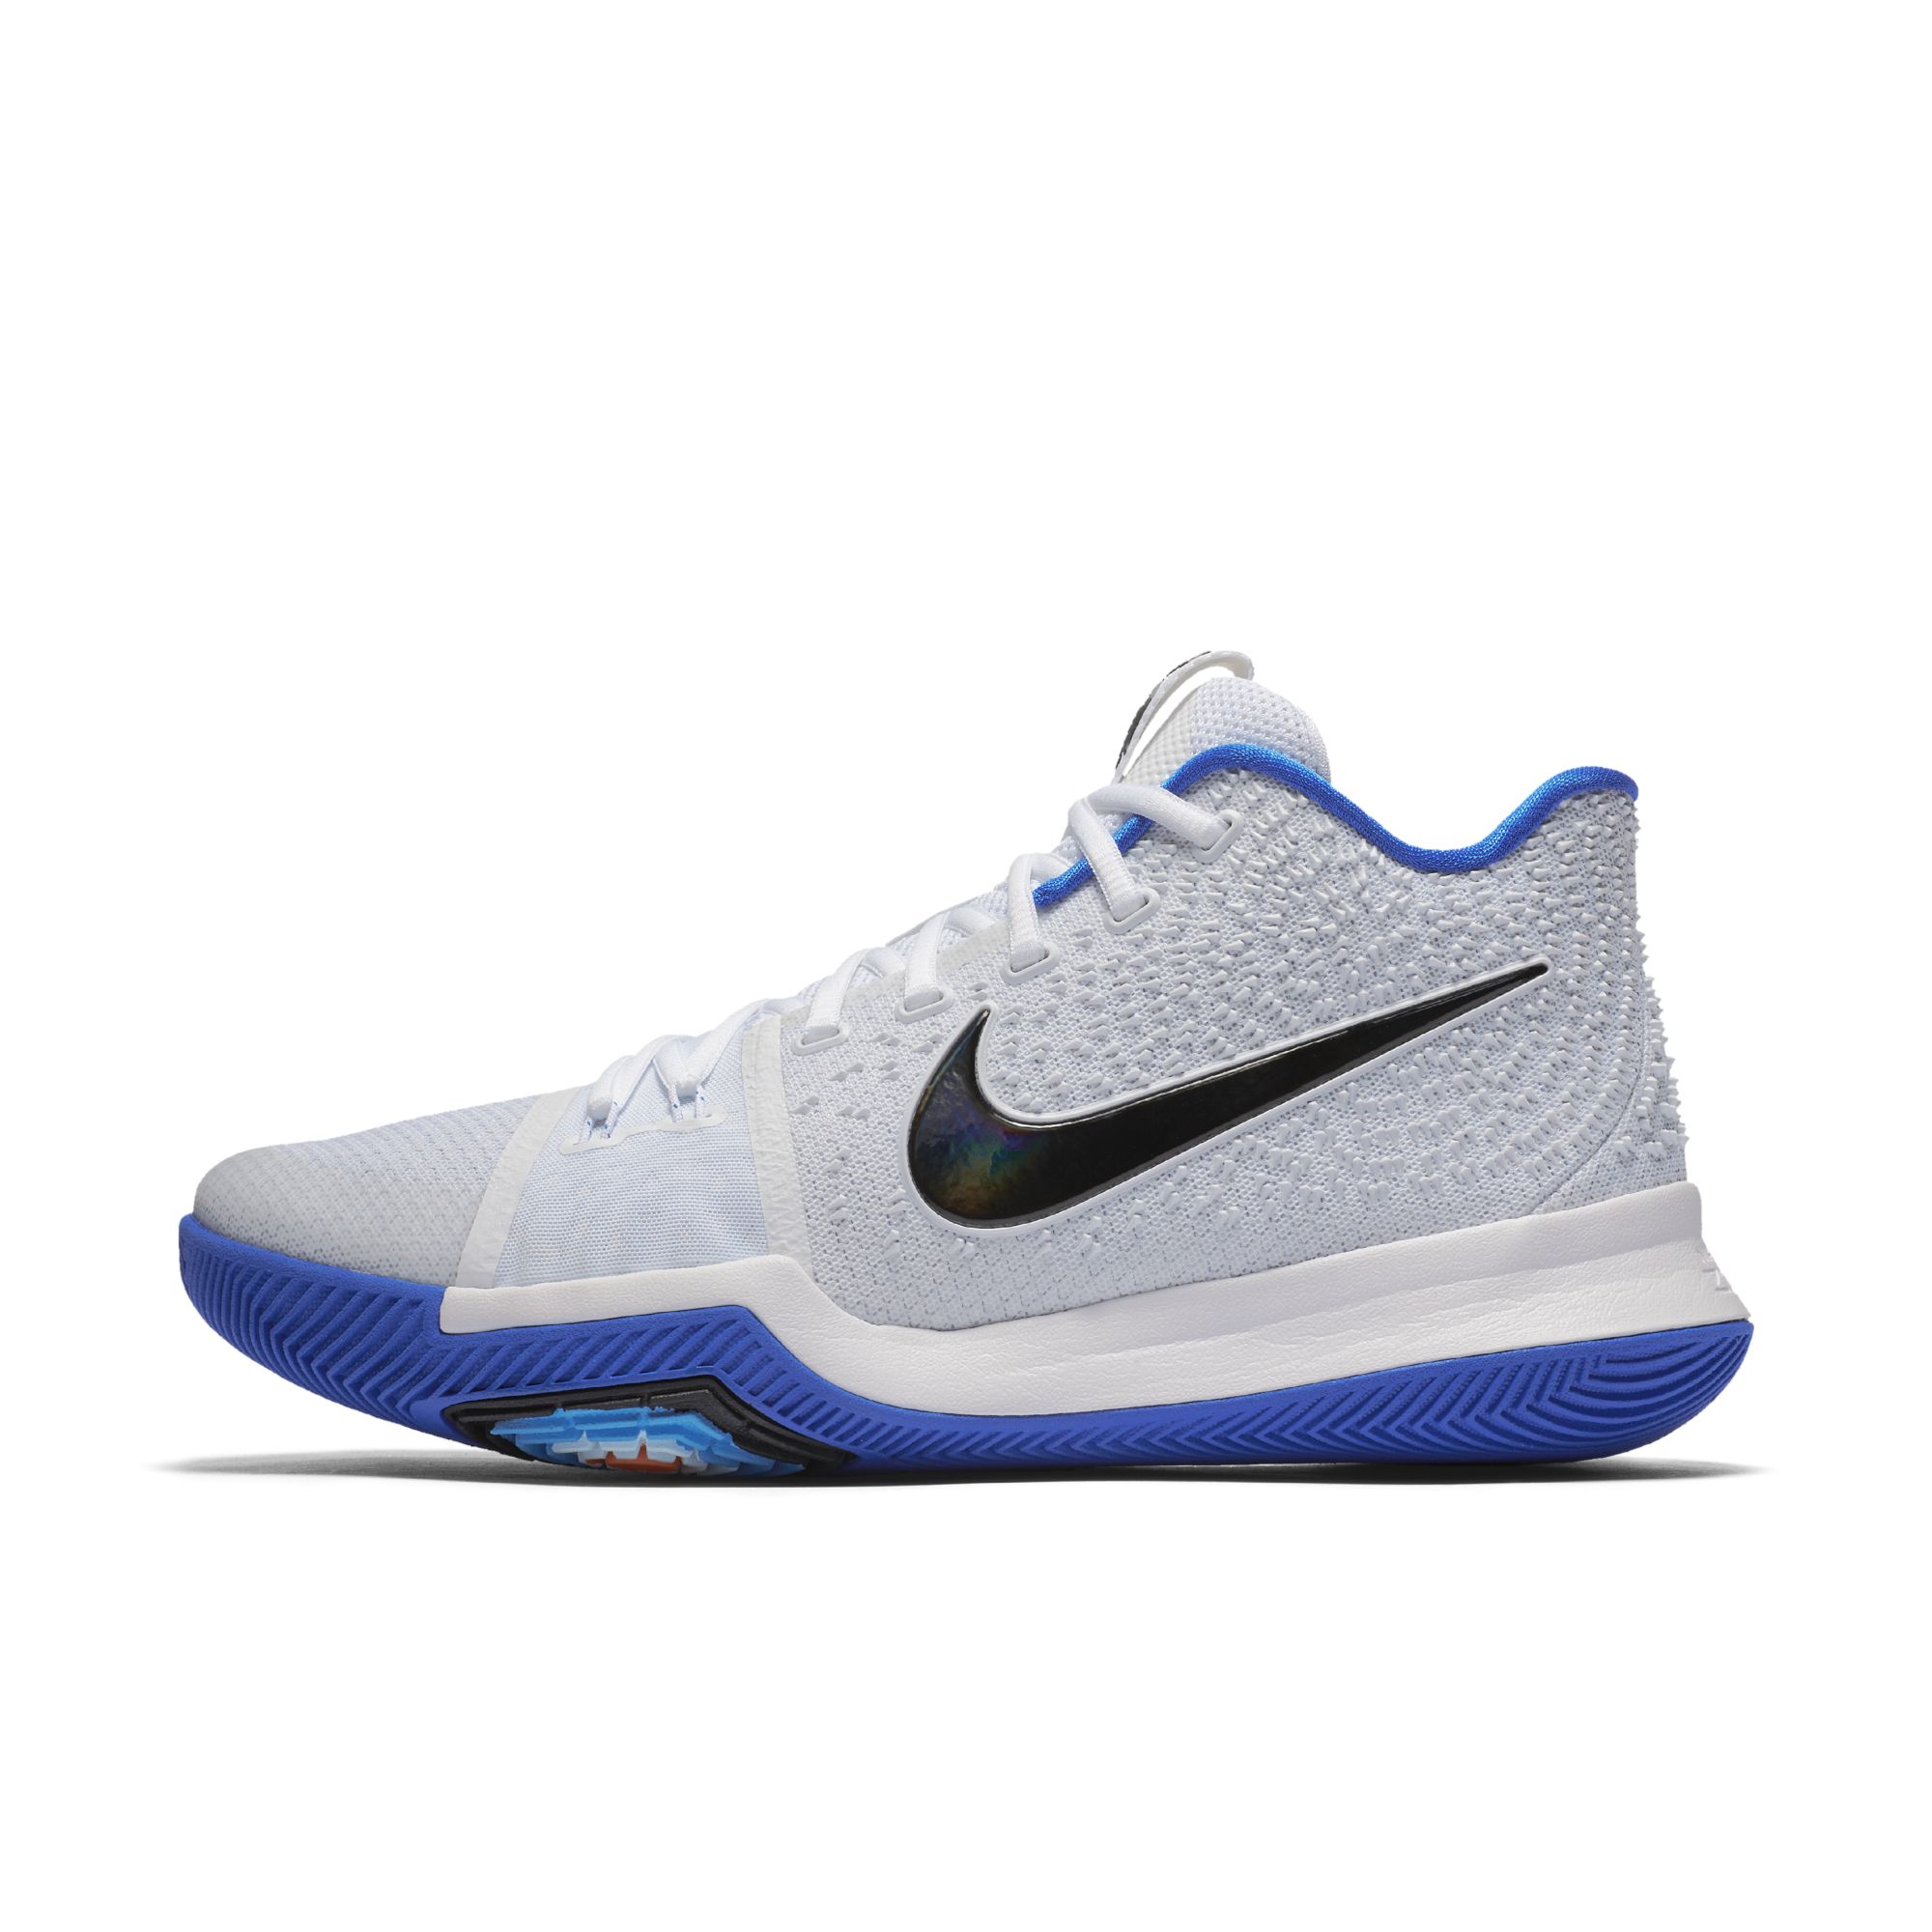 kyrie 3 volleyball